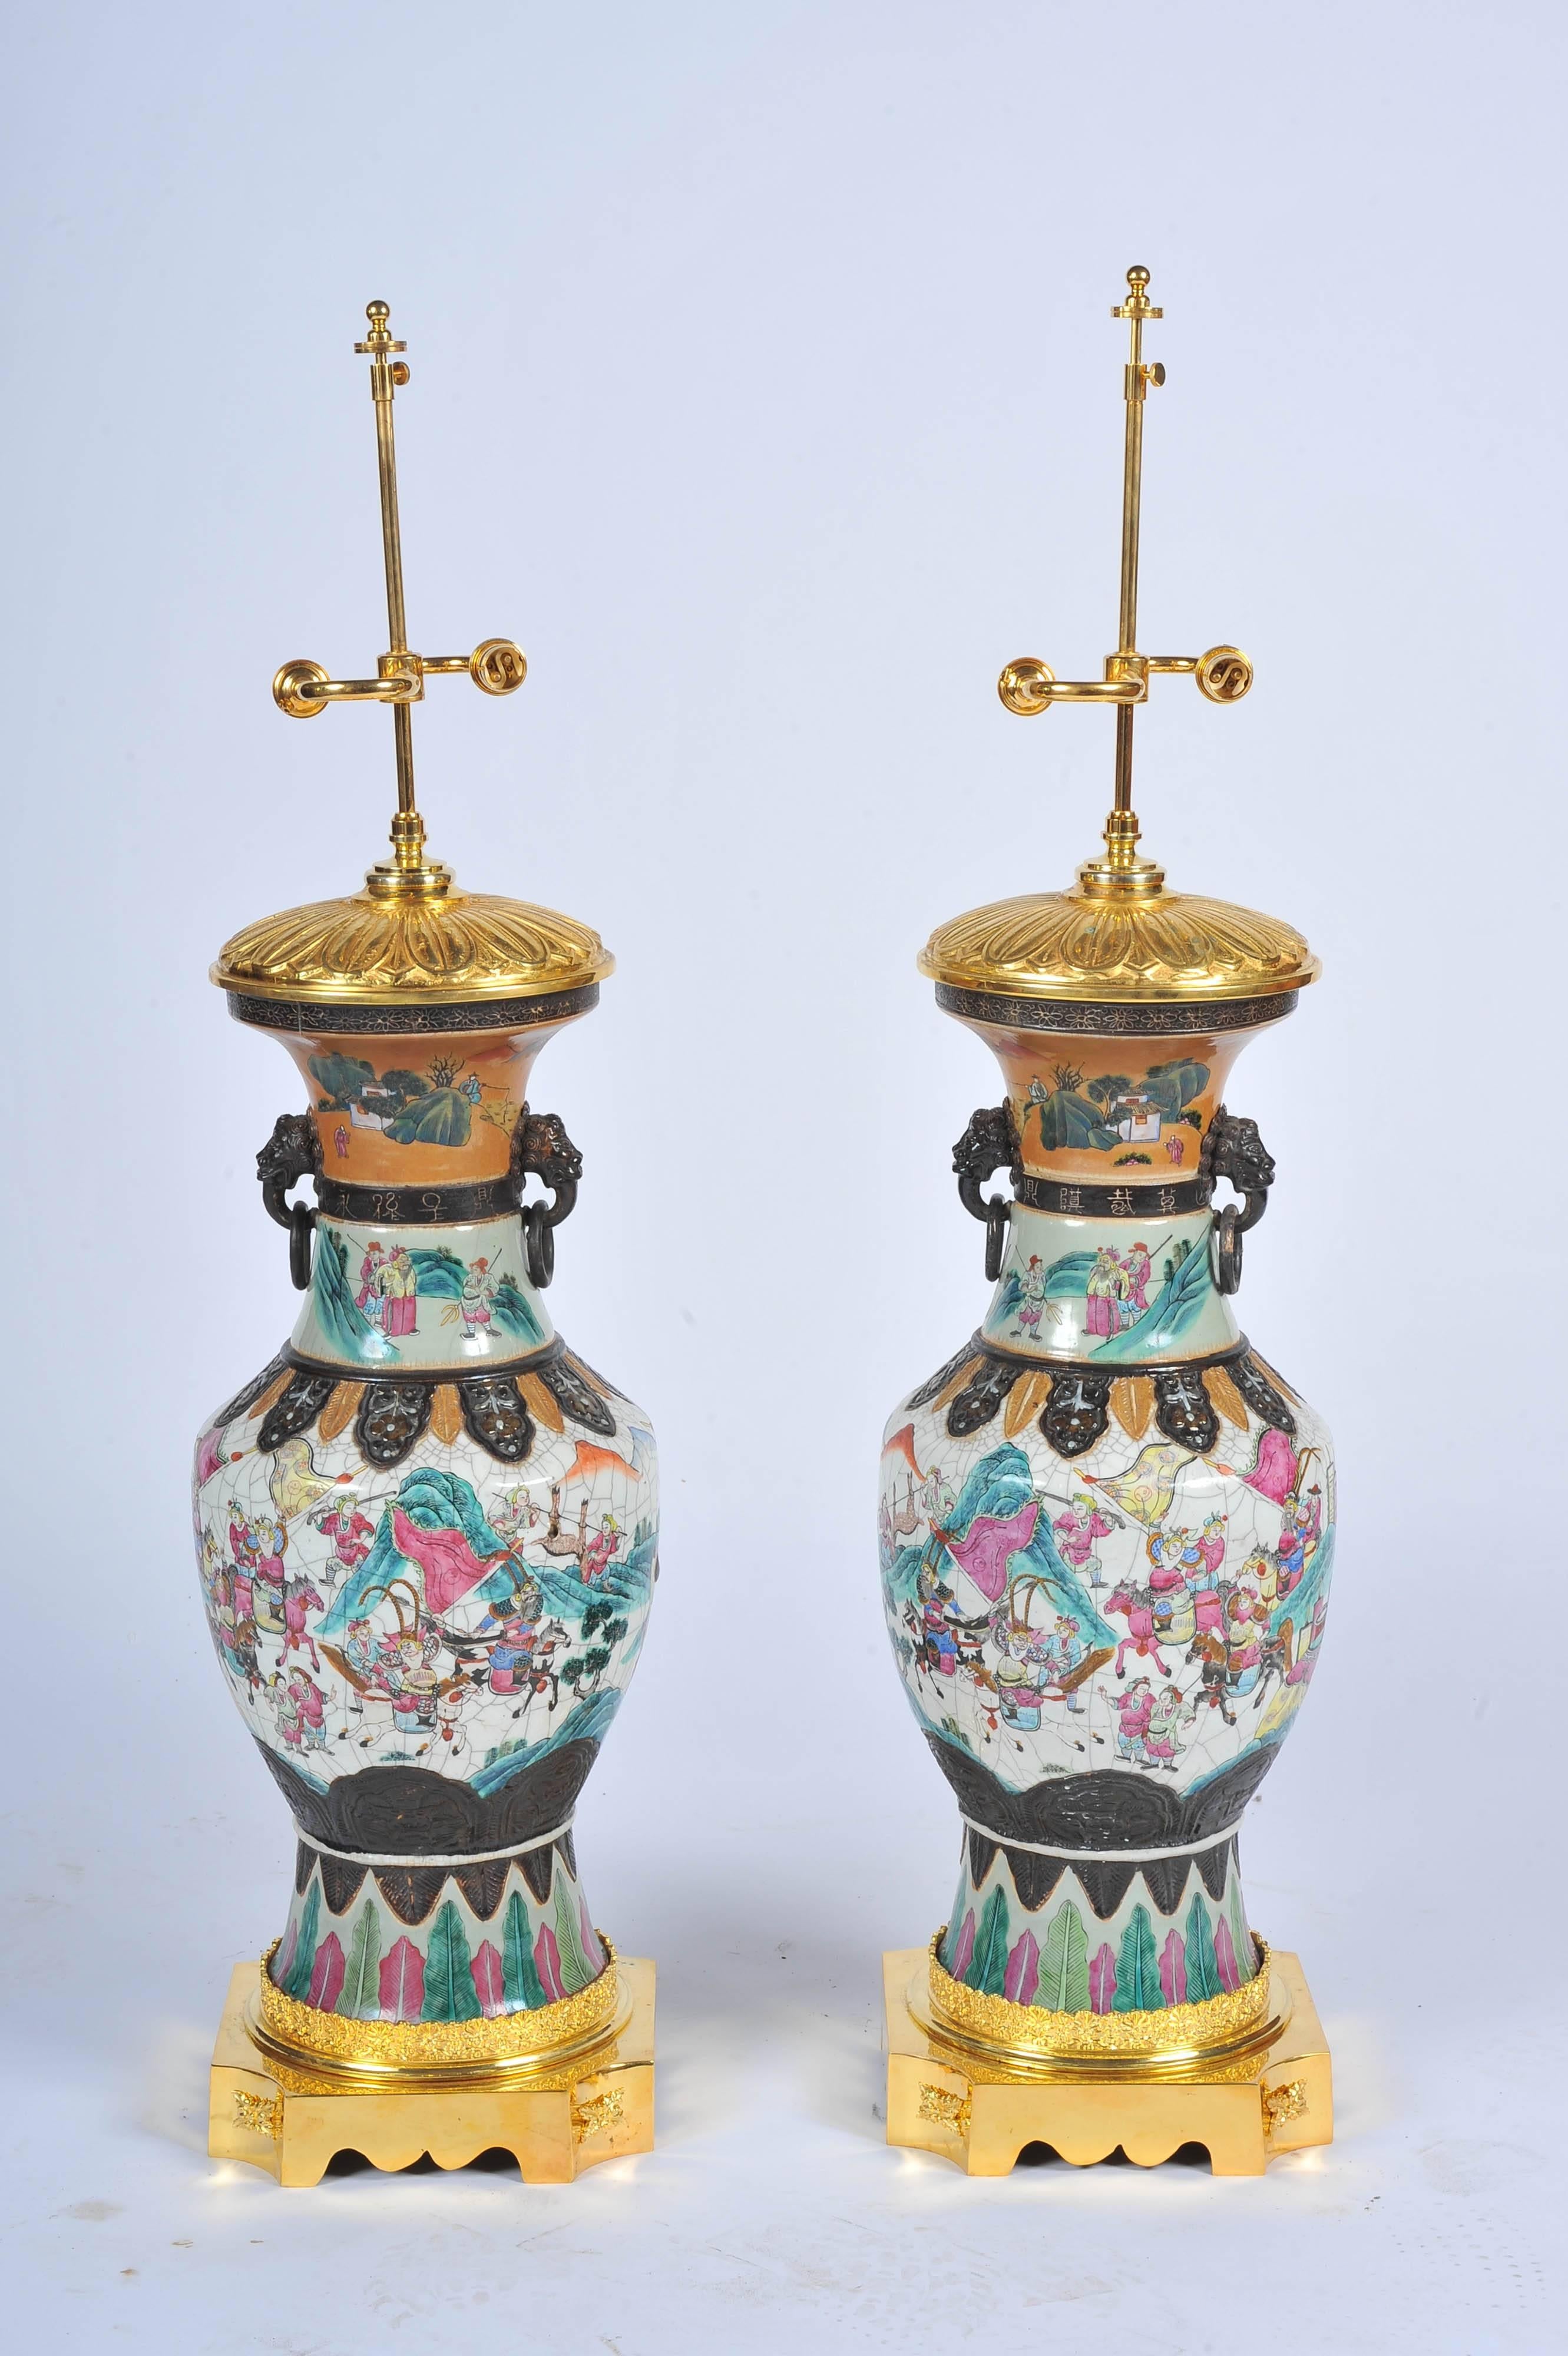 A very impressive pair of 19th century Chinese crackle ware Famille Rose vases or lamps. Each with classical mountainous scenes with men on horse back hunting. Set on gilded ormolu bases and lids.